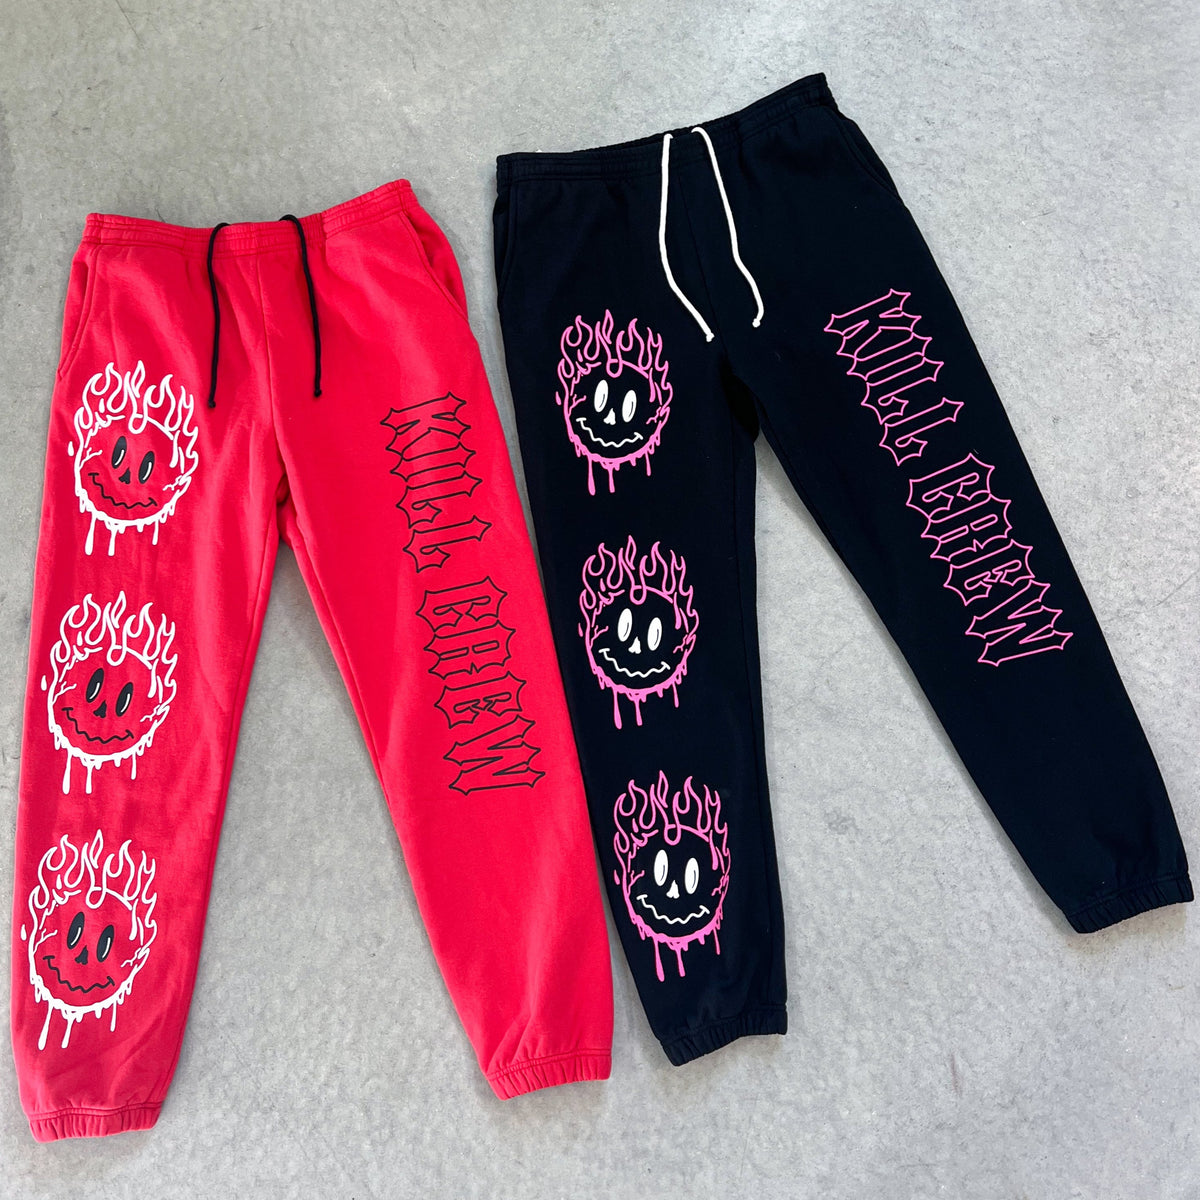 HEAVYWEIGHT LUX SMILEY SWEATPANTS FLAME - RED / BLACK - Kill Crew